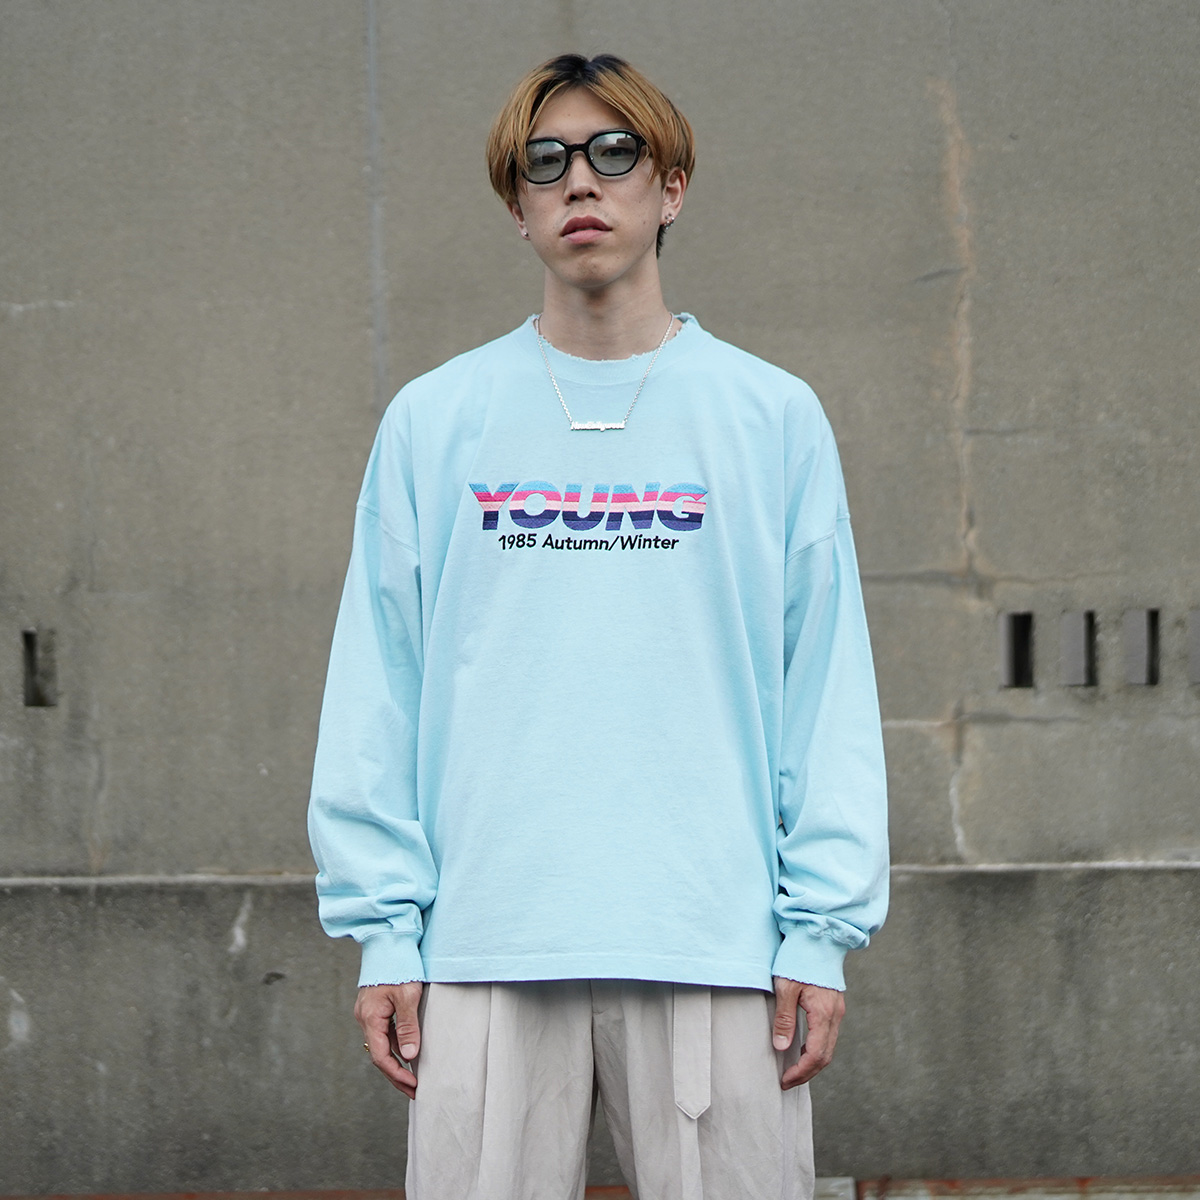 DAIRIKU Brat pack YOUNG Embroidery Tee - Tシャツ/カットソー(七分/長袖)